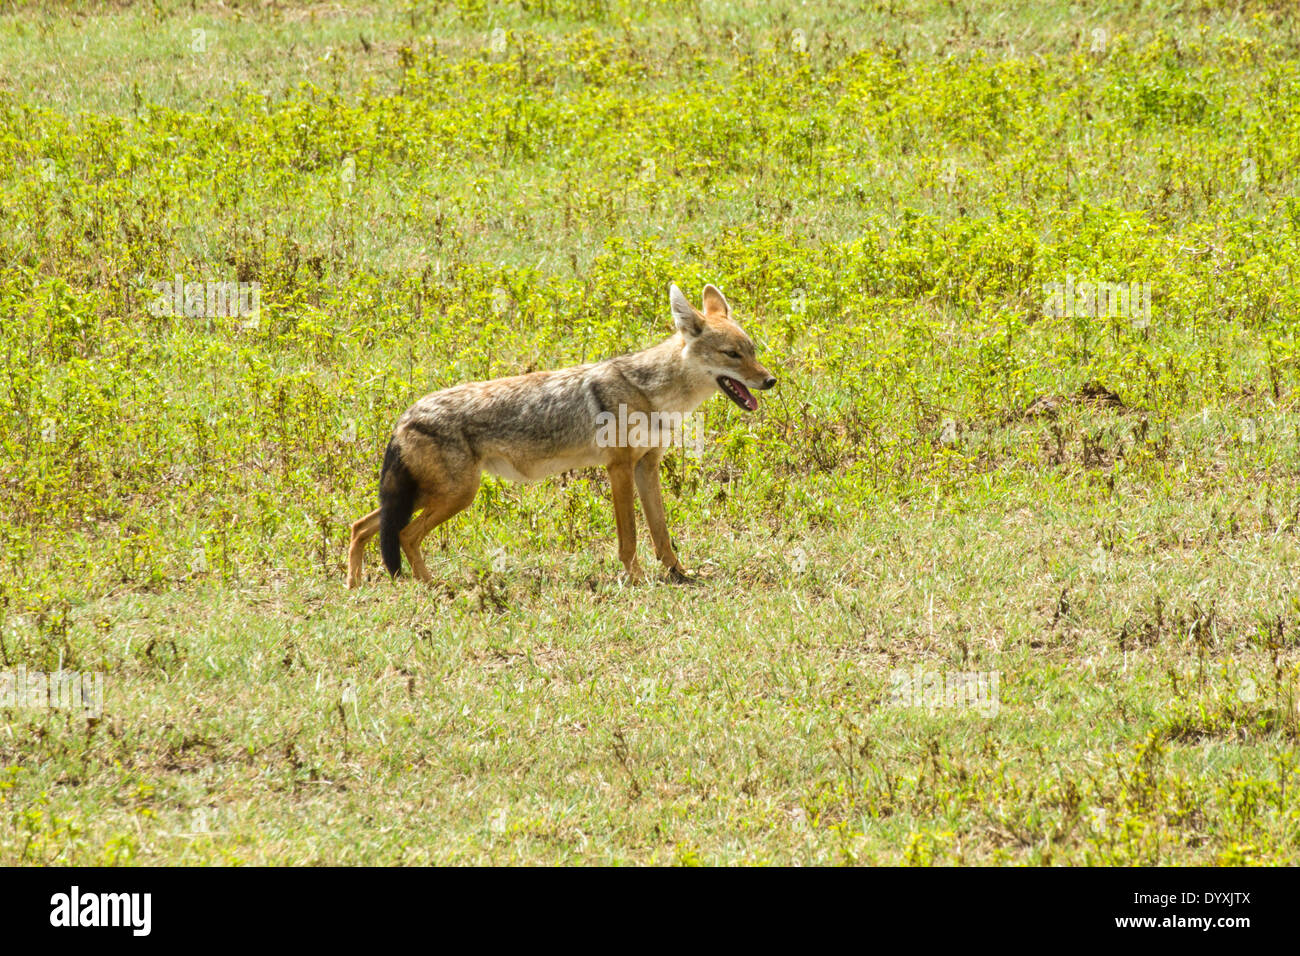 Nero-backed jackal (Canis mesomelas), noto anche come l'argento-backed o rosso jackal Foto Stock